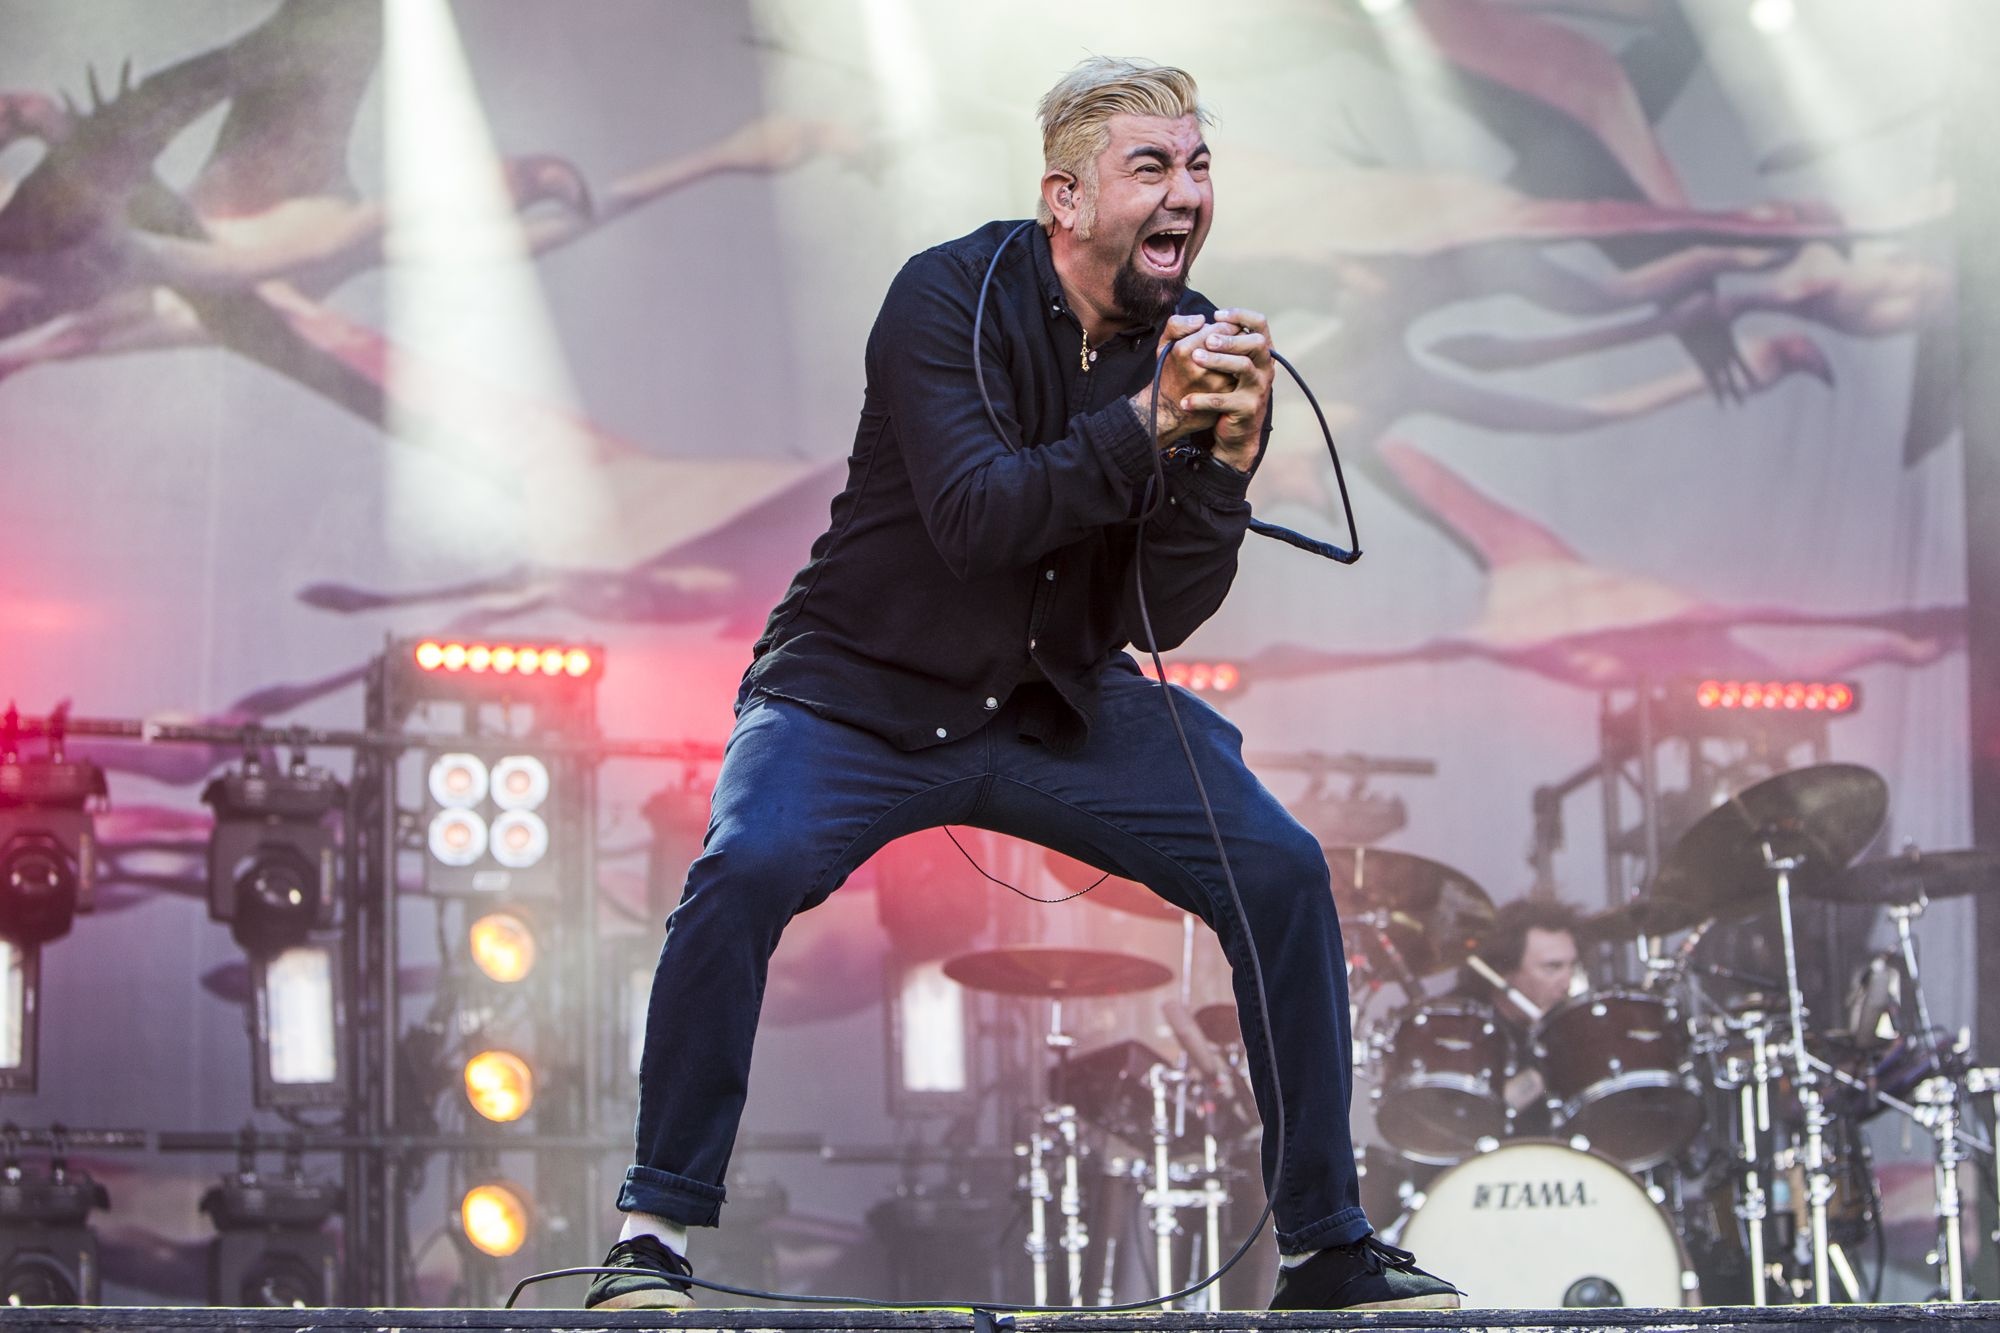 Chino Moreno, Furious solo song, Deftones lead, New musical journey, 2000x1340 HD Desktop